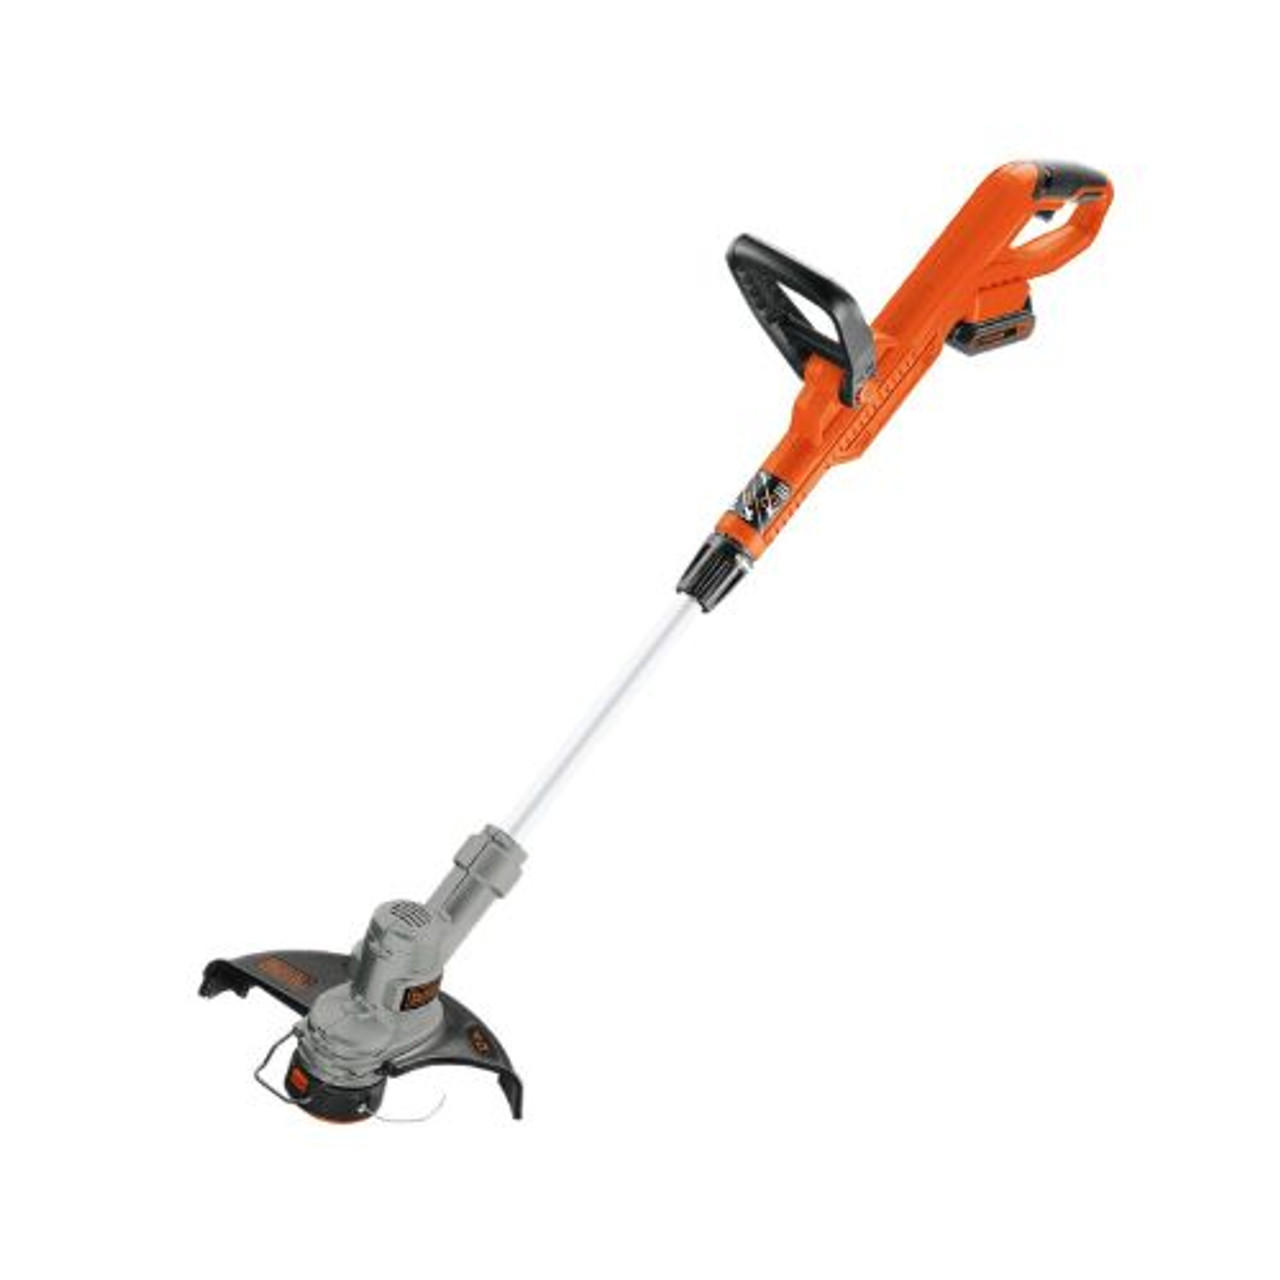 BLACK+DECKER LST201 10 in 20V MAX Lithium Ion String Trimmer (NO BATTERY)